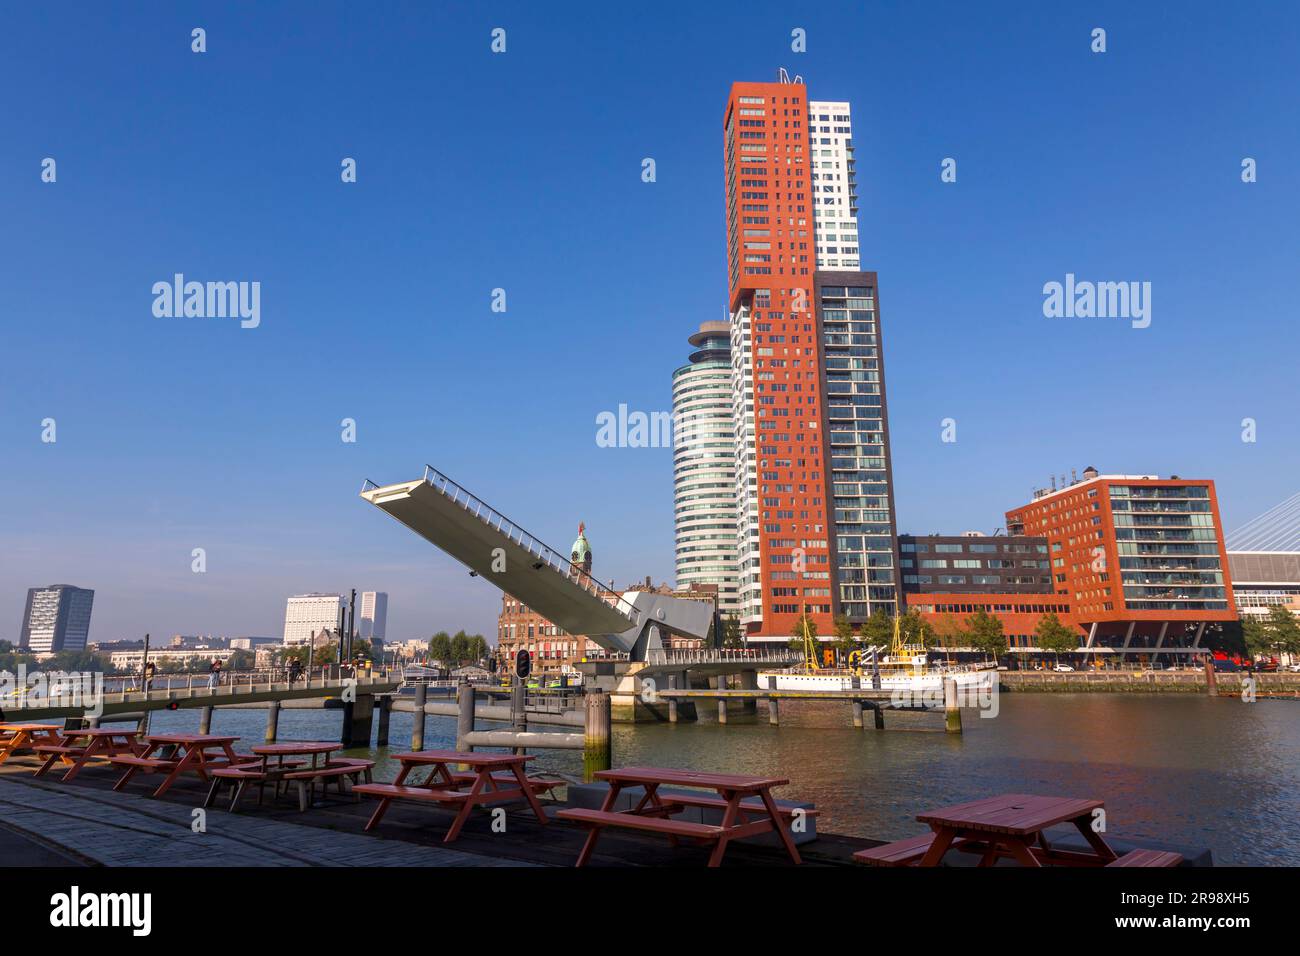 Rotterdam, NL - OCT 8, 2021: The Rijnhaven Bridge, regionally known as the Hoerenloper is a pedestrian and bicycle bridge over the Rijnhaven in Rotter Stock Photo